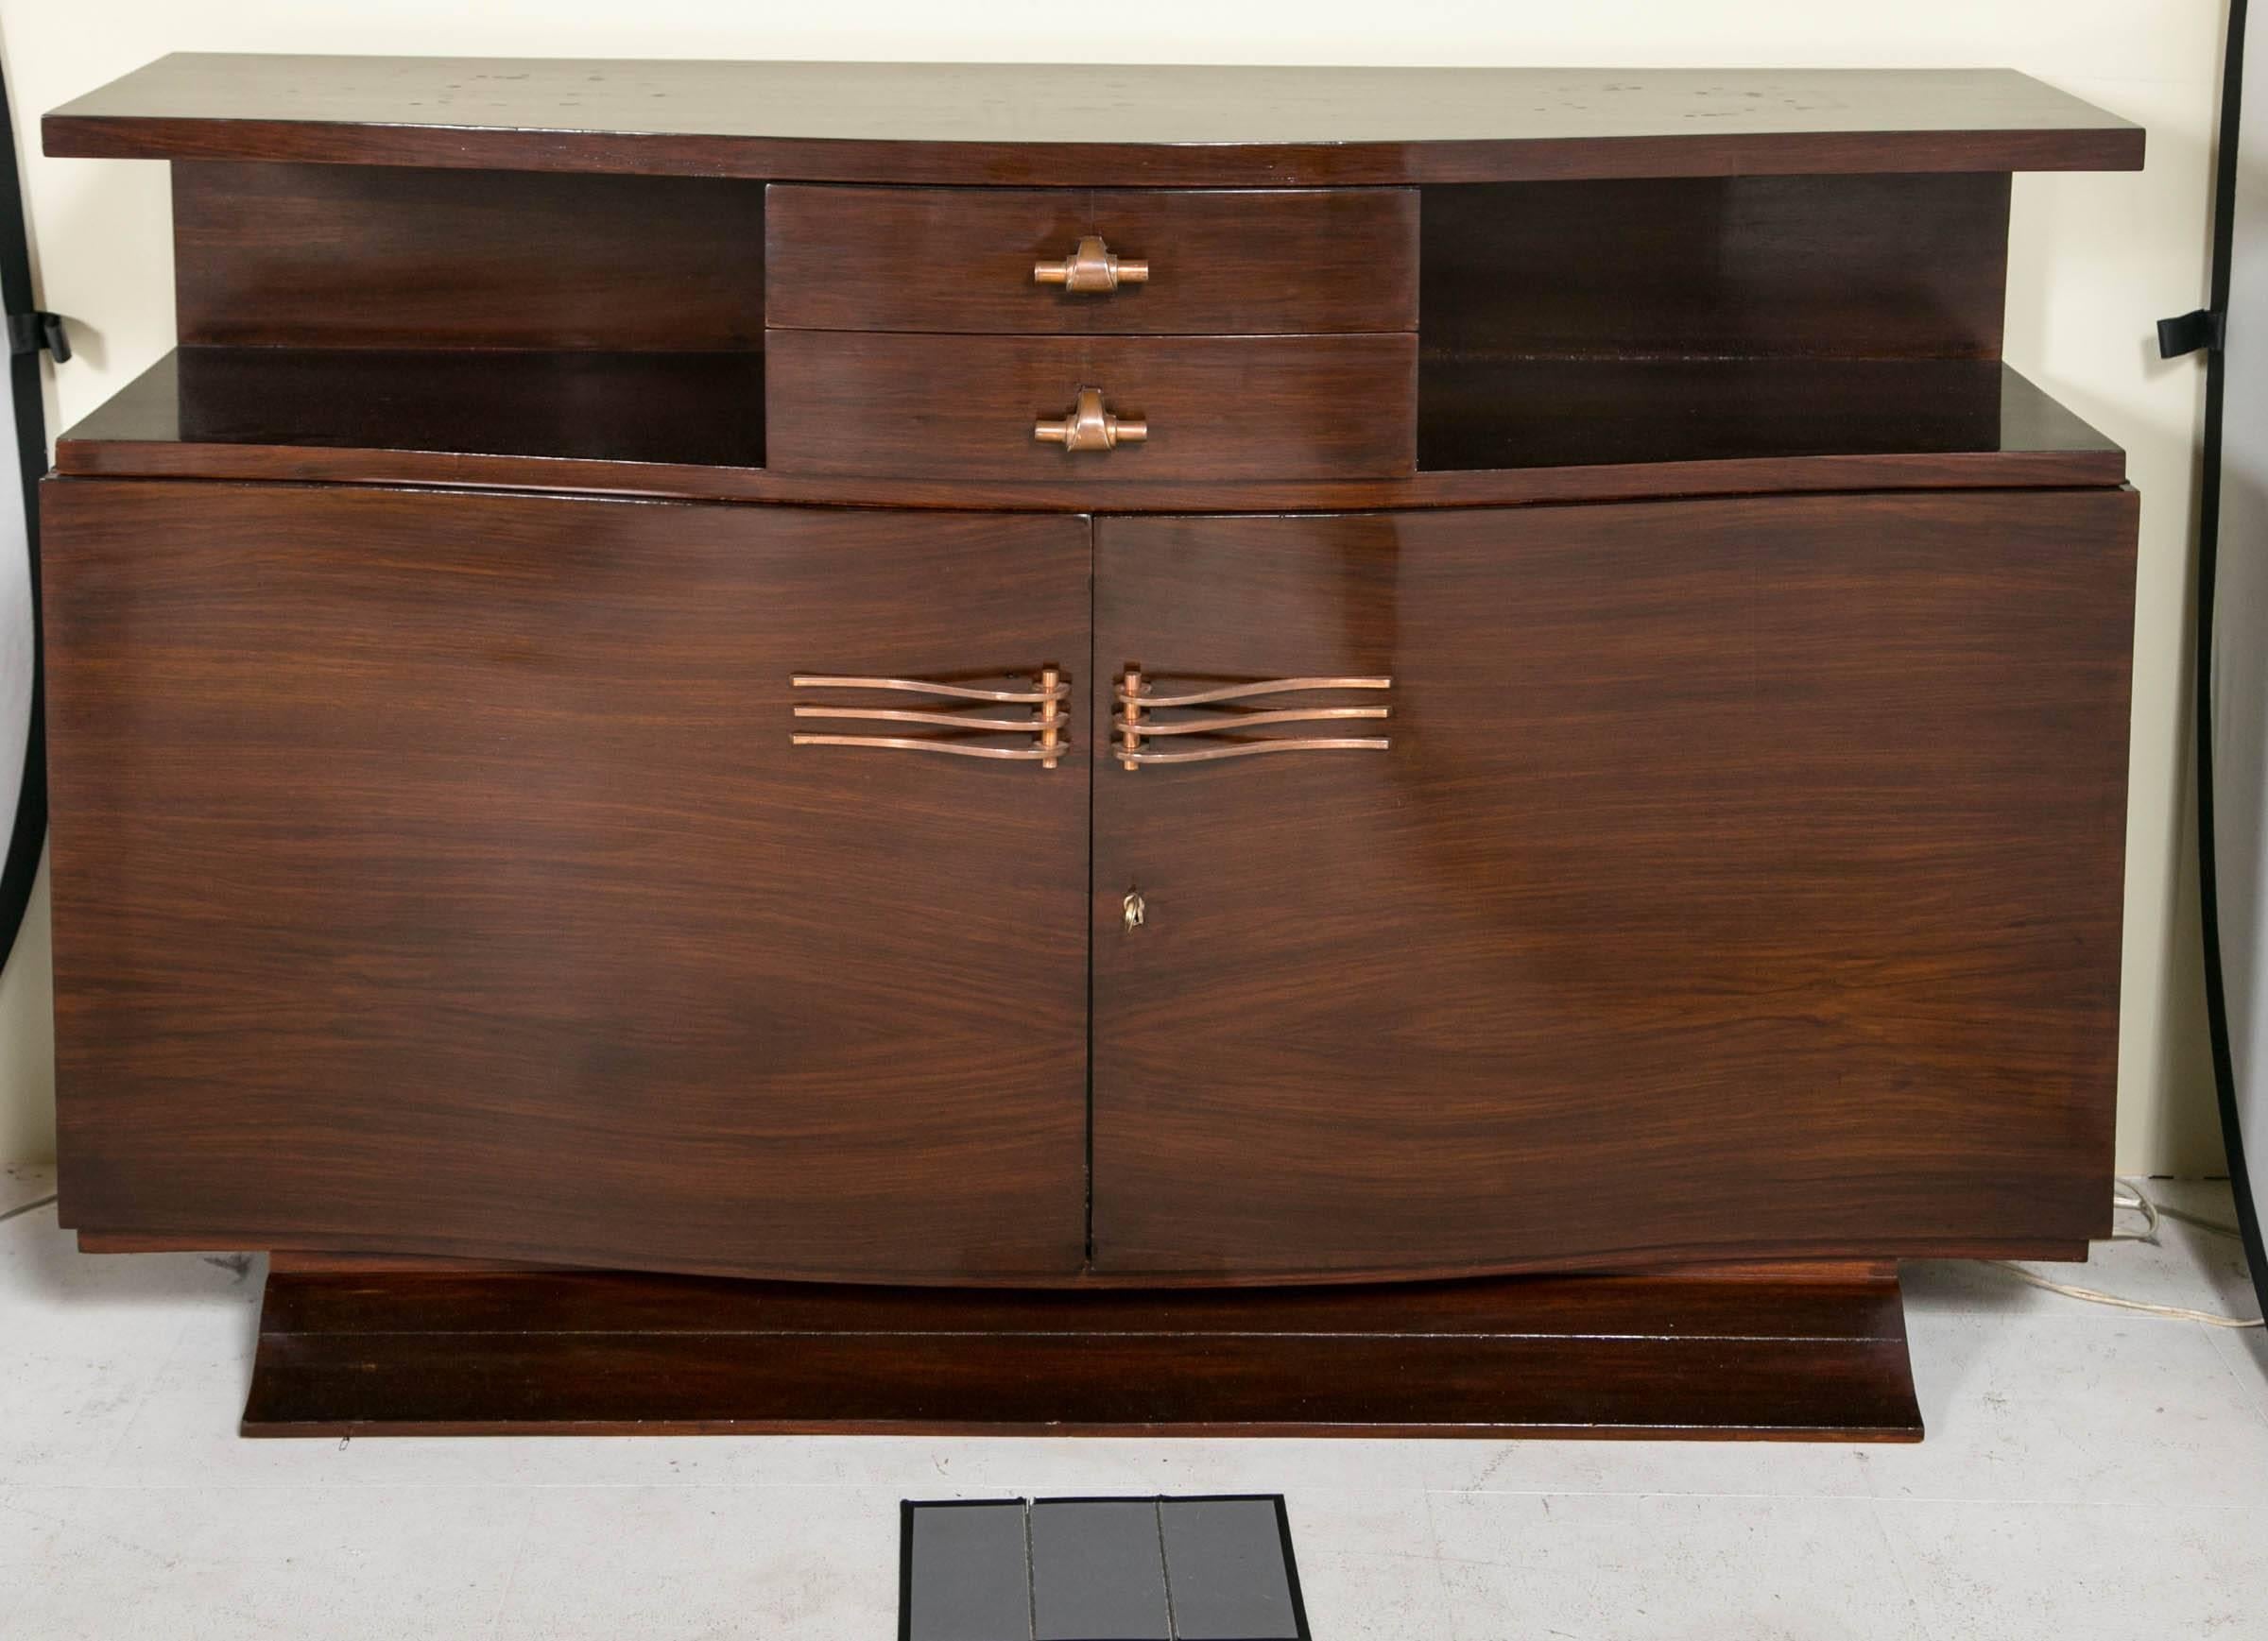 French 1935 Art Deco rosewood sideboard with bow fronted design.